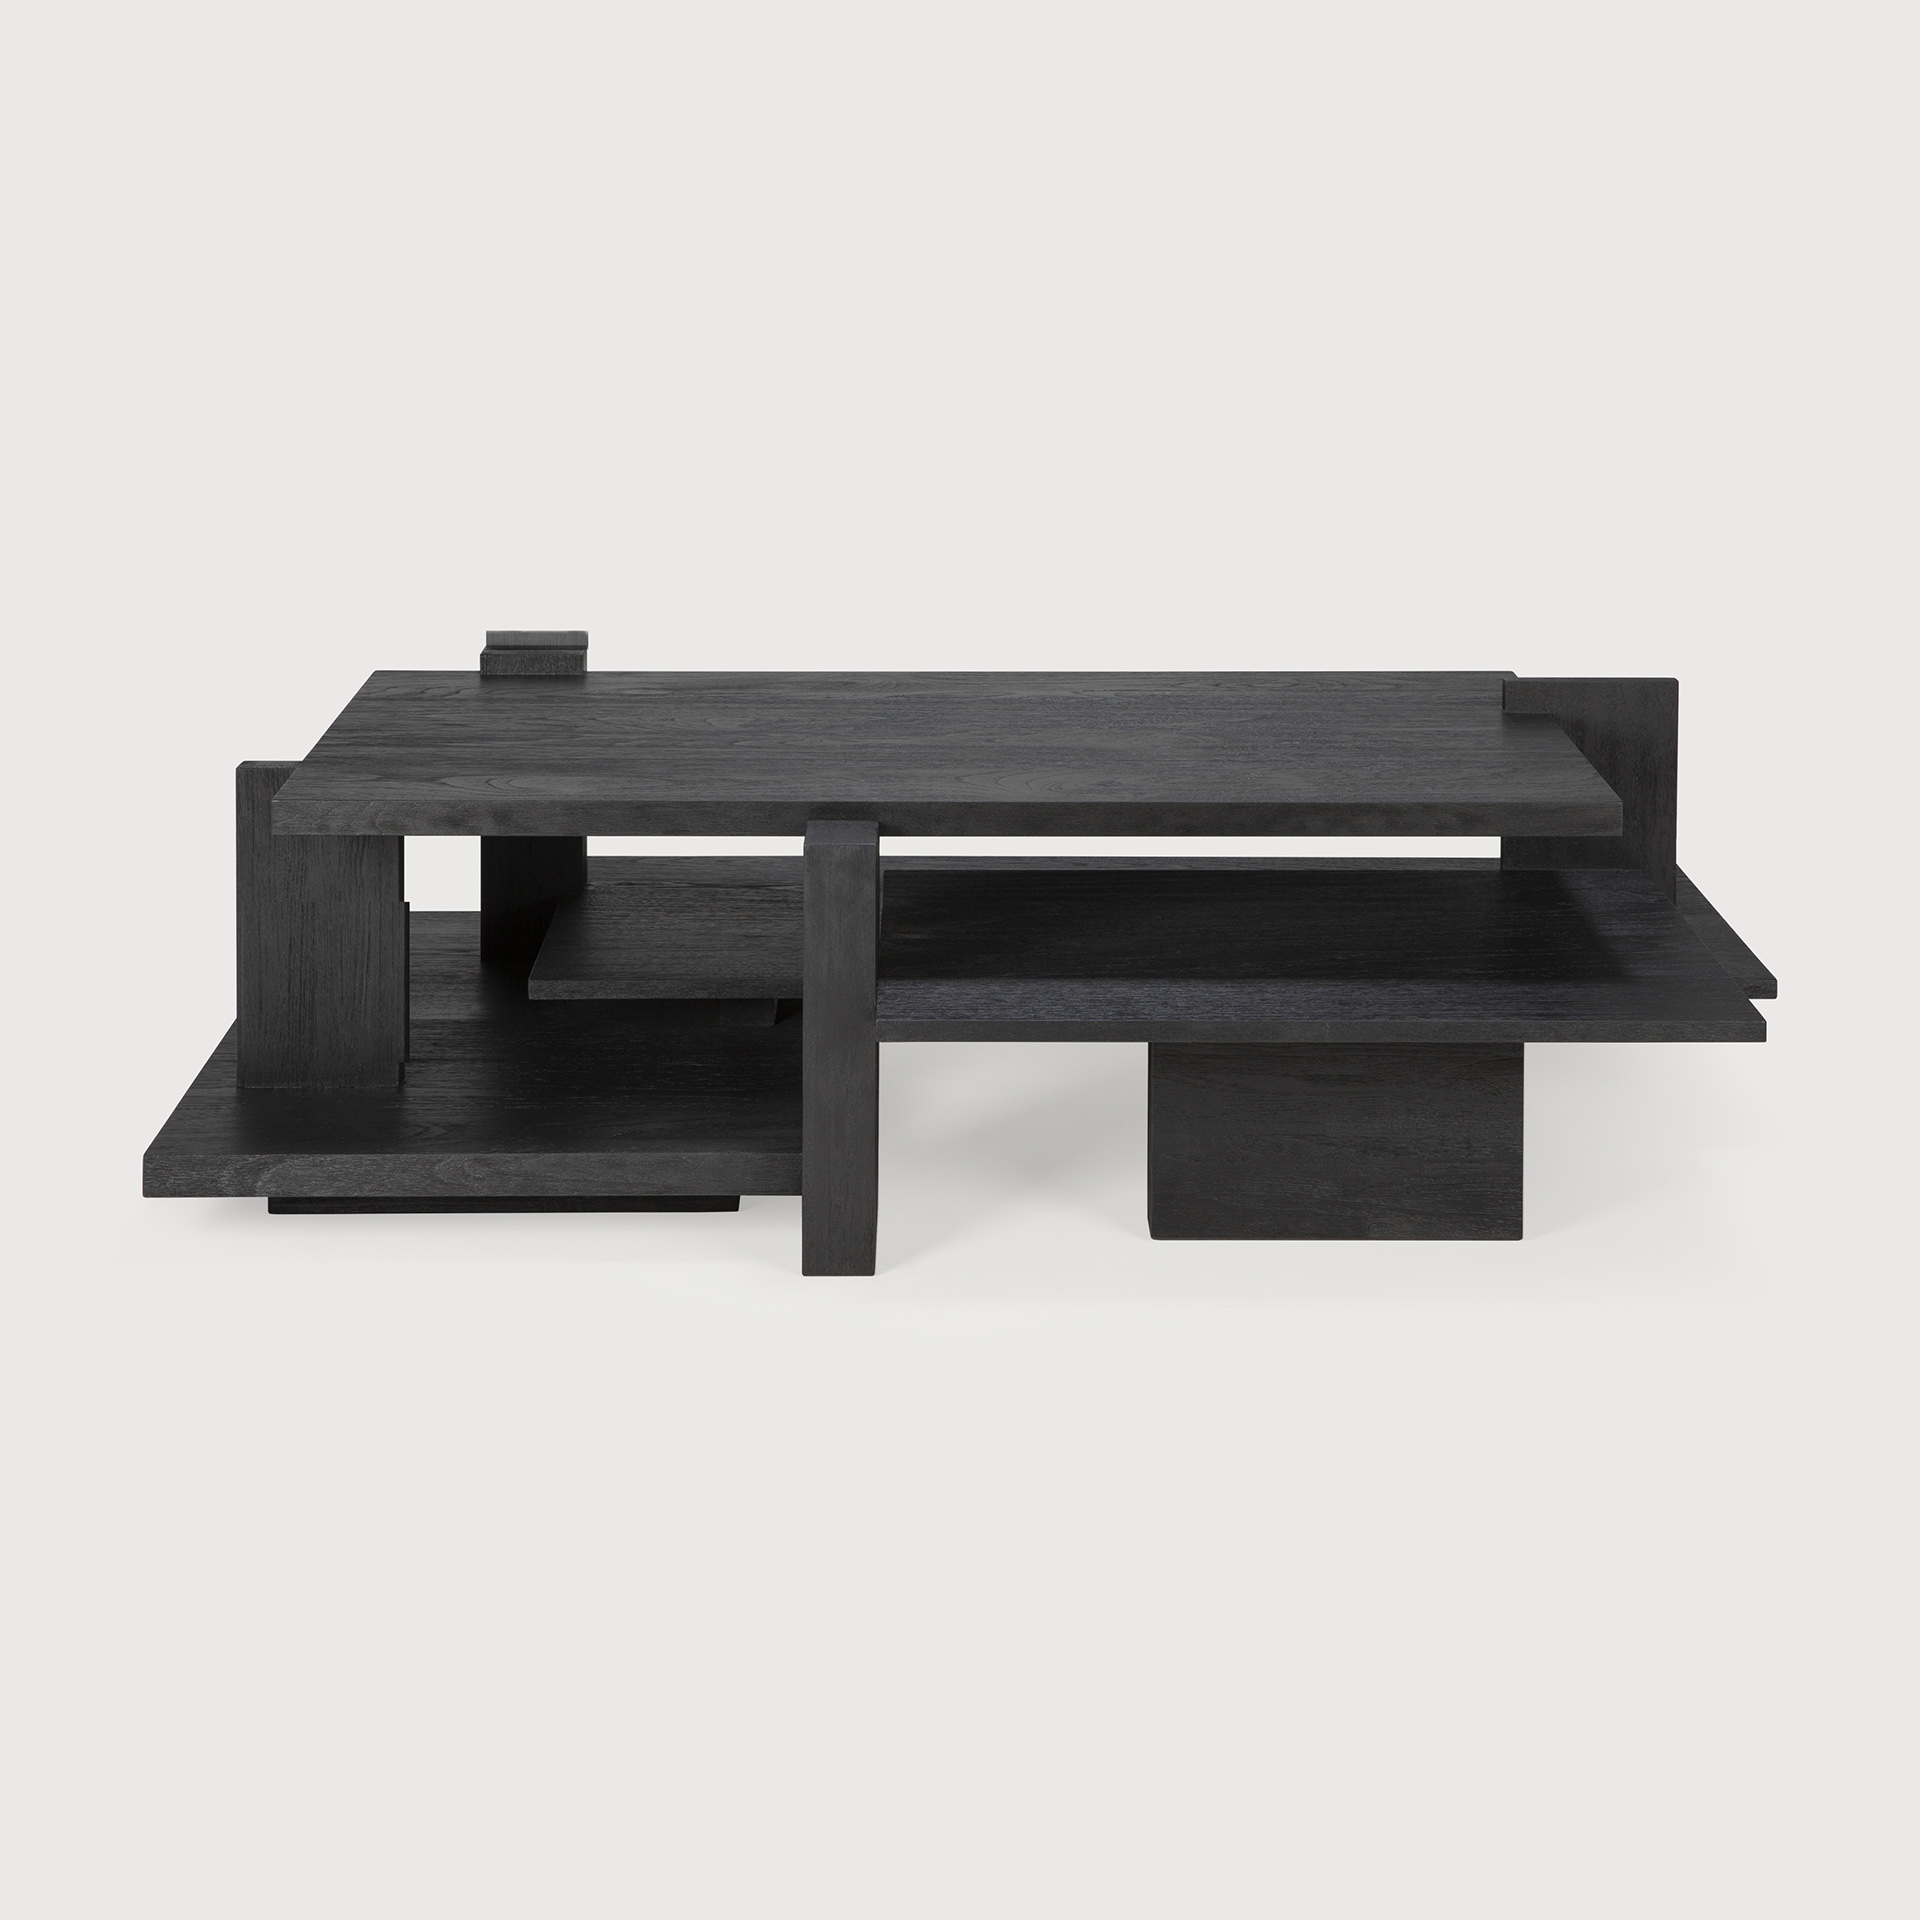 [10118*] Abstract coffee table